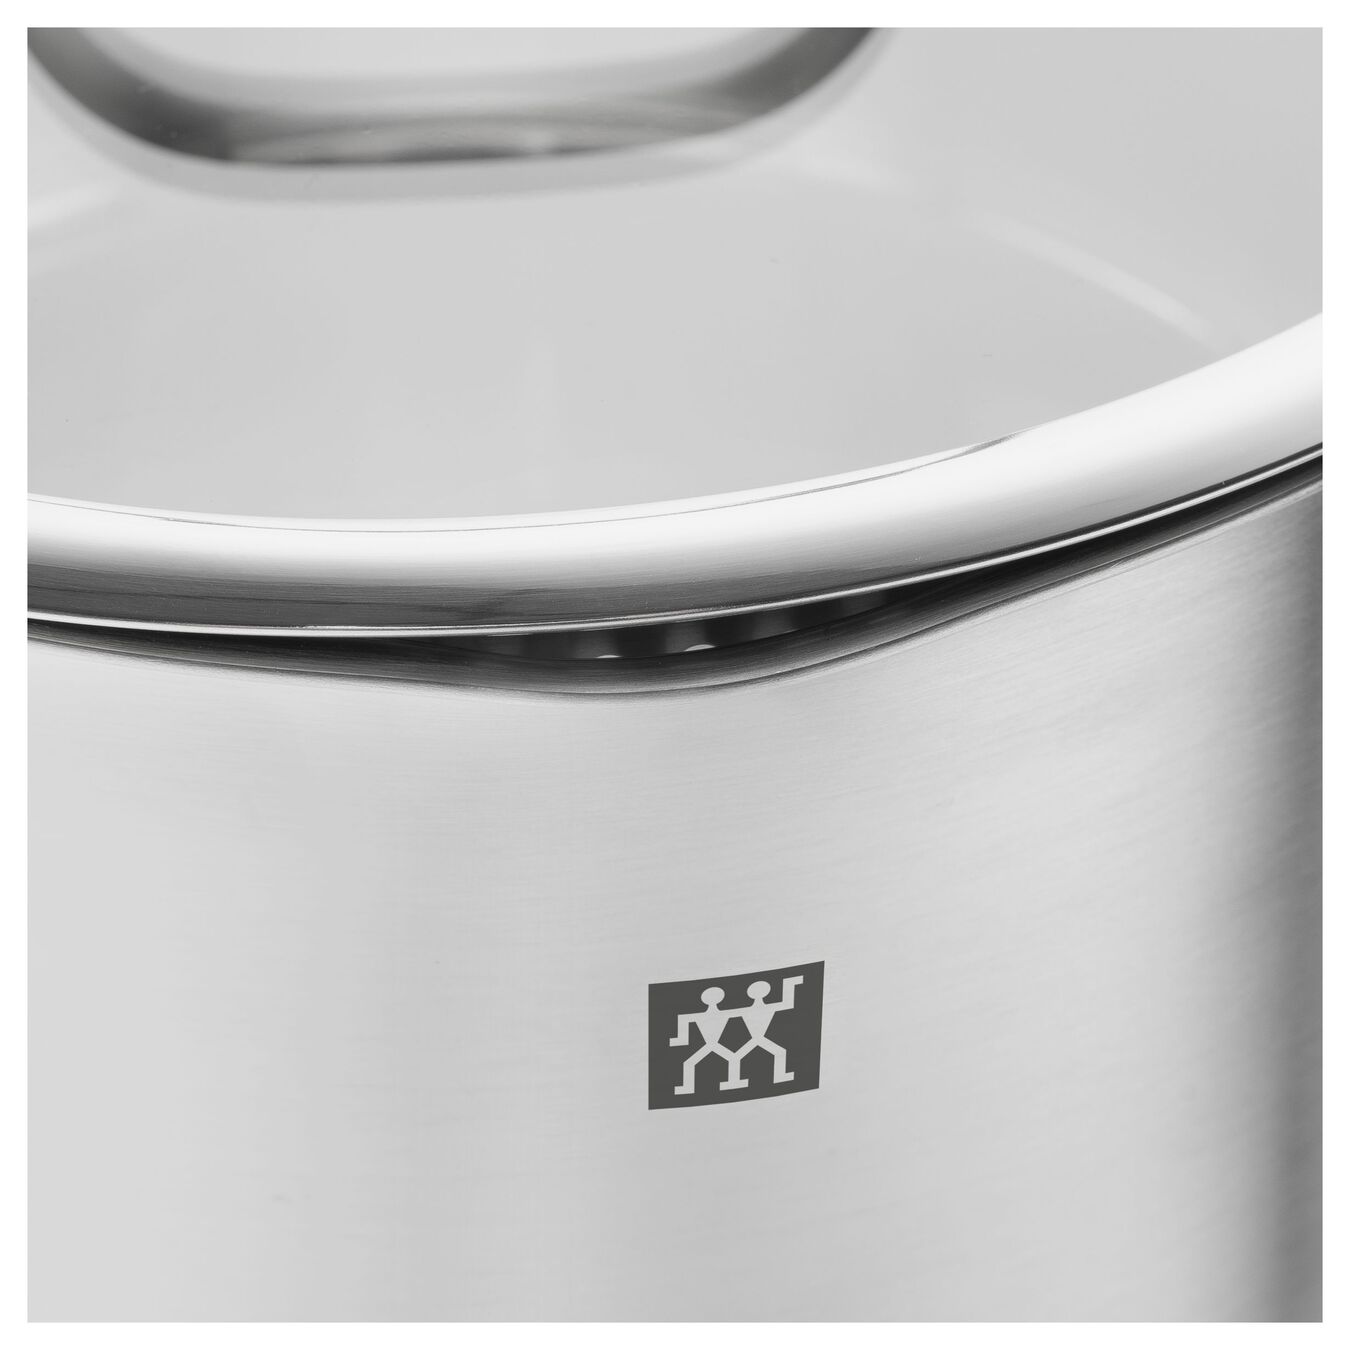 ZWILLING - TRUEFLOW Stainless Steel Stock pot with Glass Lid - 24cm / 6L